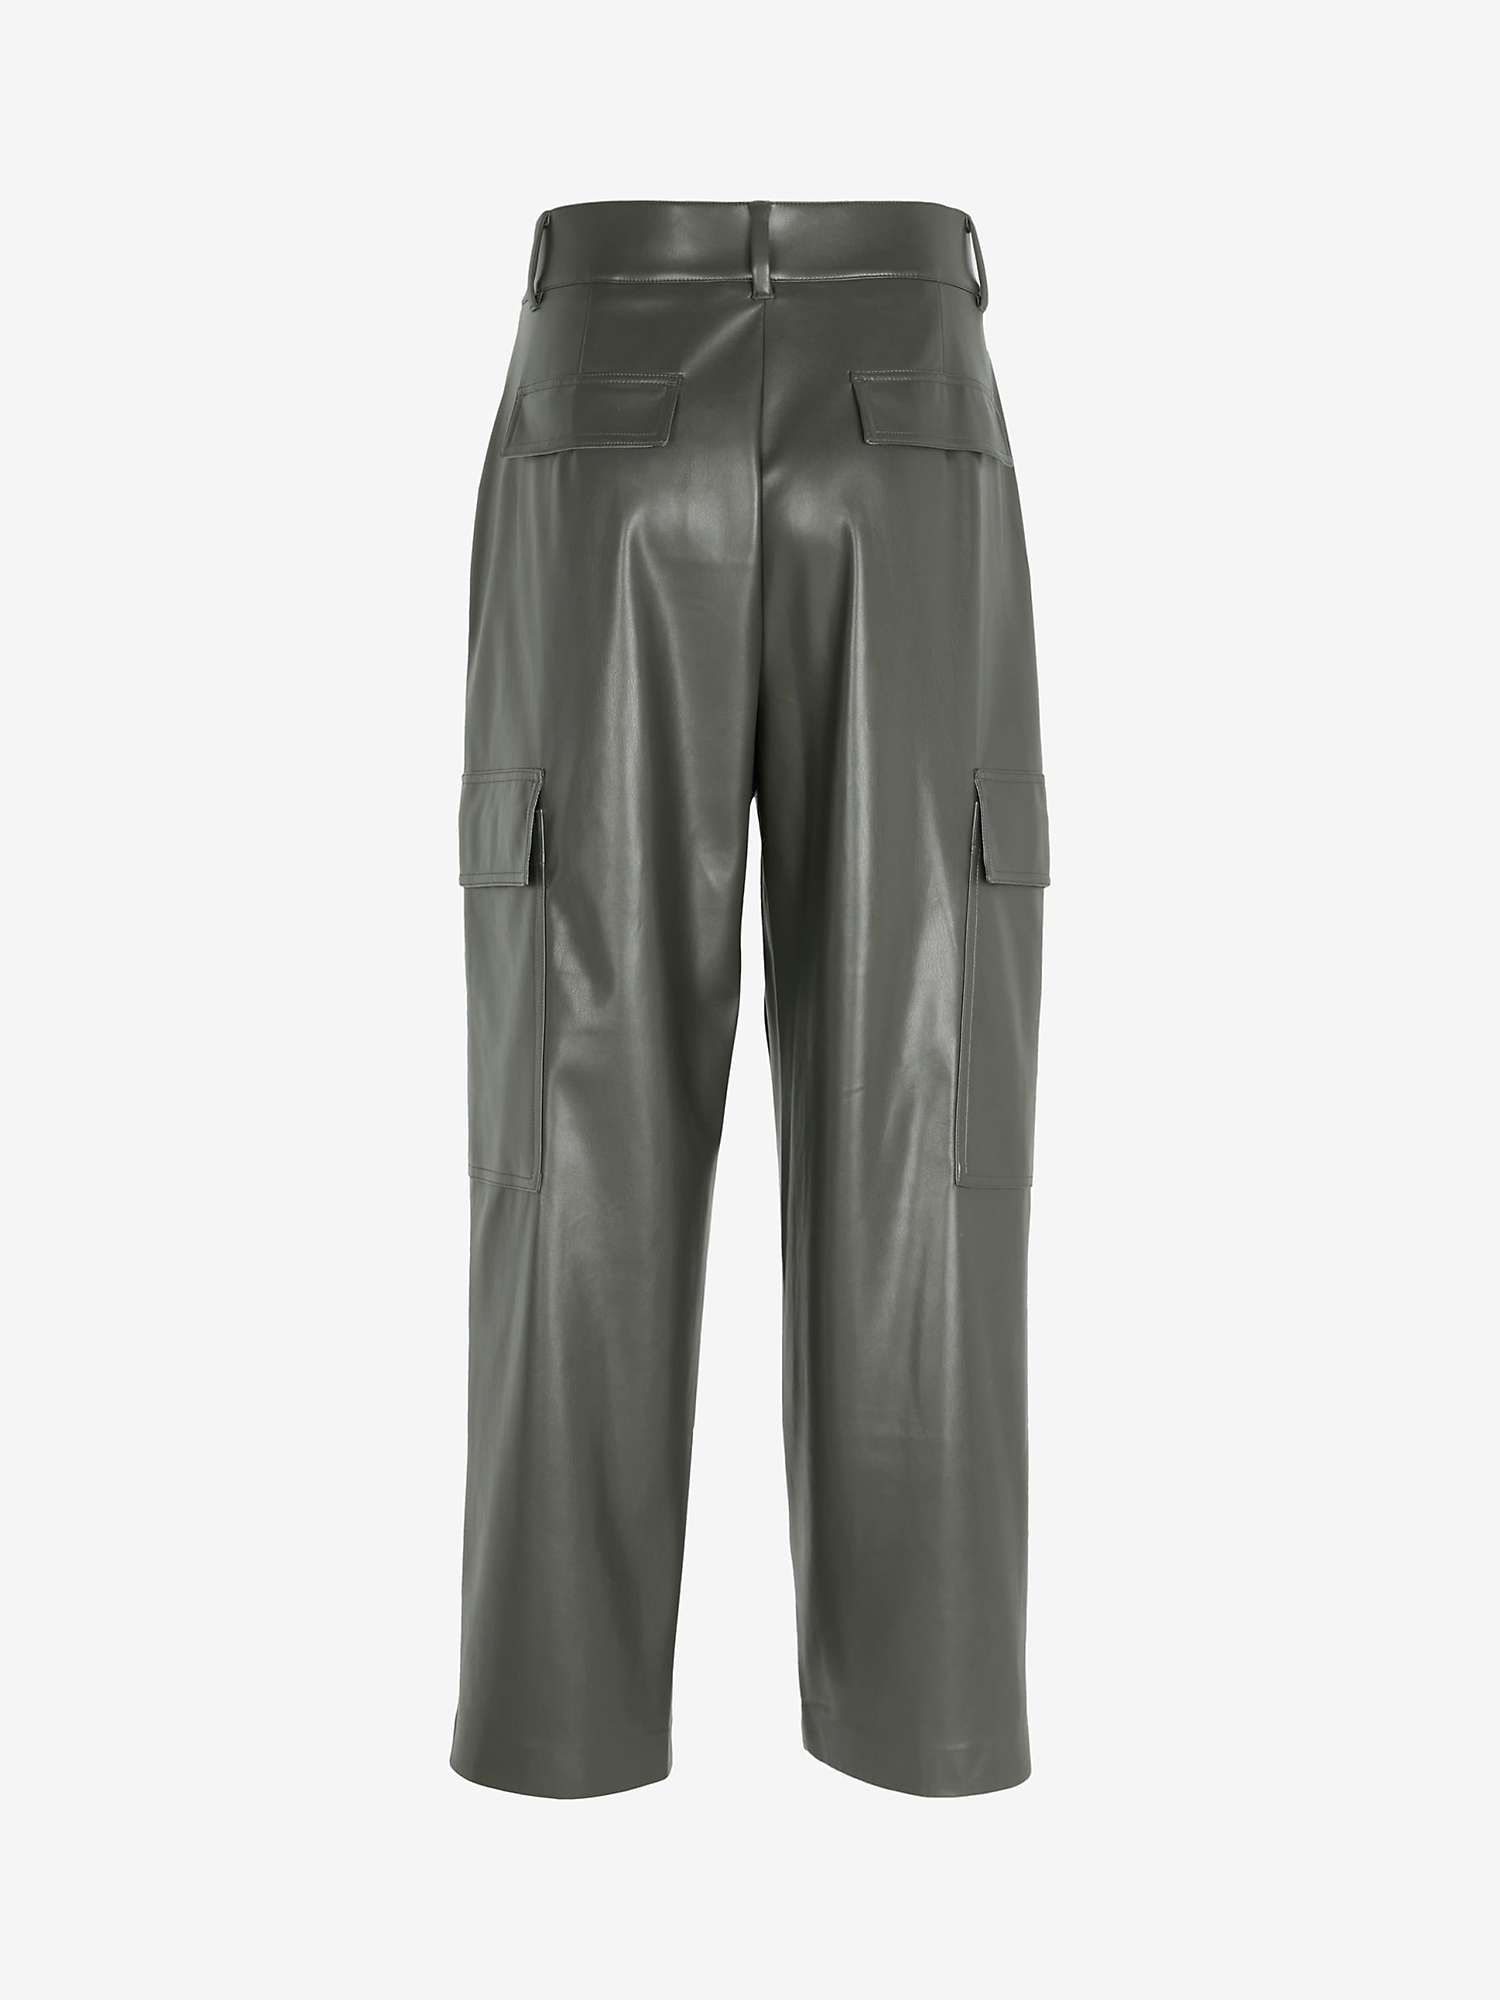 Buy Mint Velvet Faux Leather Cargo Trousers, Green Online at johnlewis.com